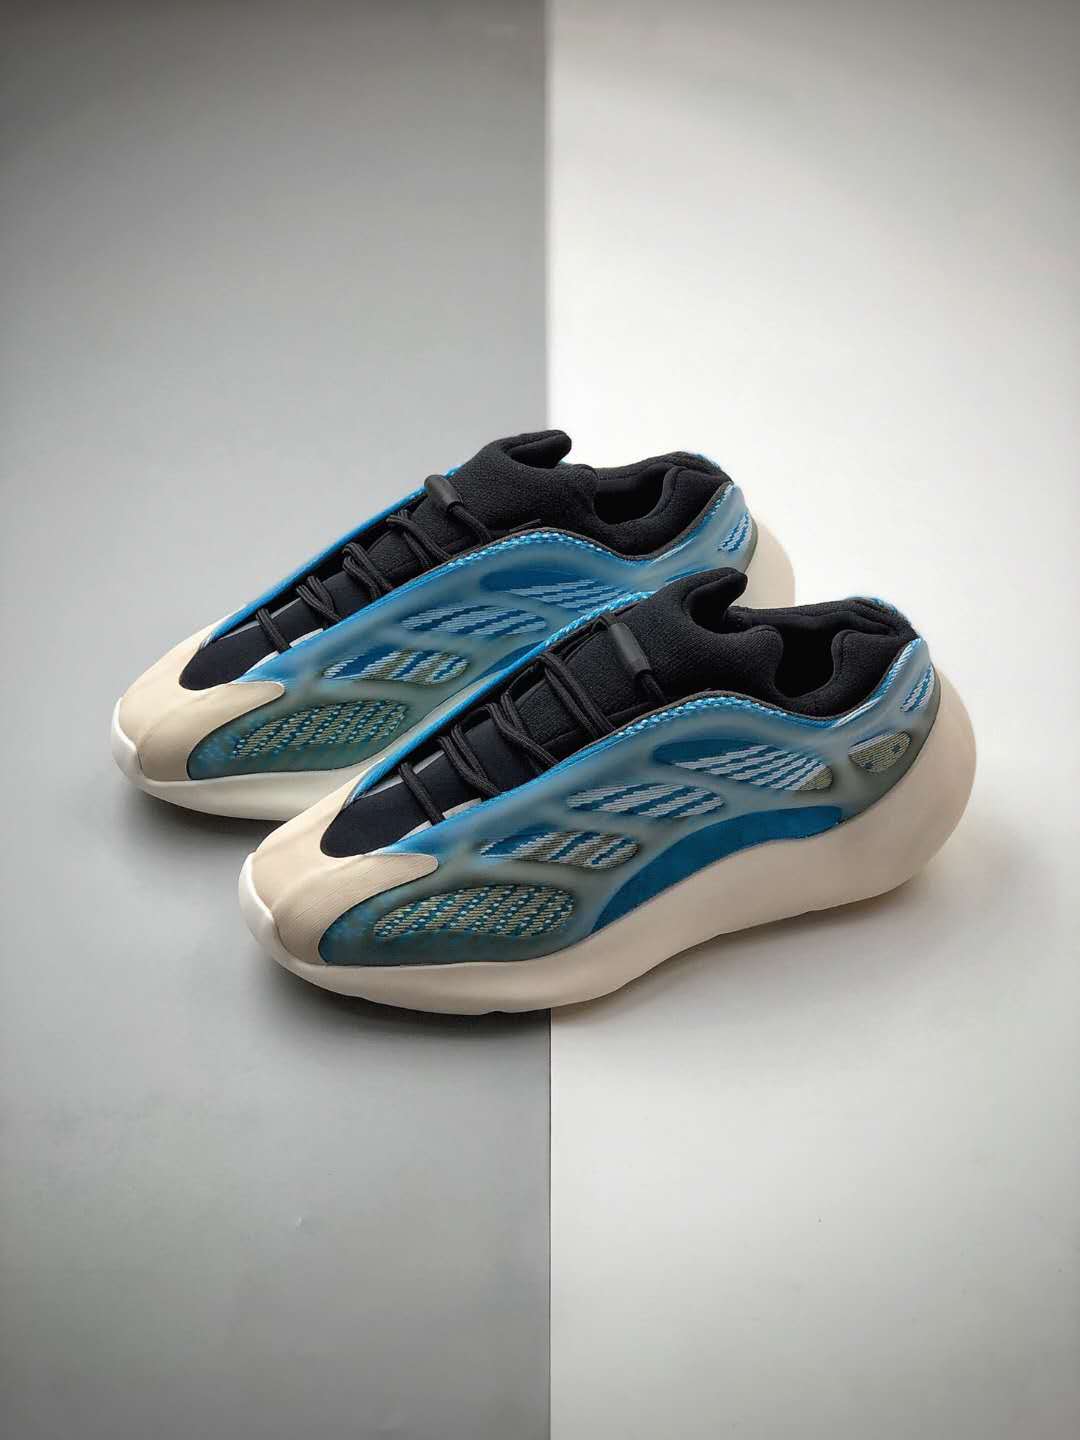 Adidas Yeezy 700 V3 'Arzareth' G54850 - Latest Release with Unique Design